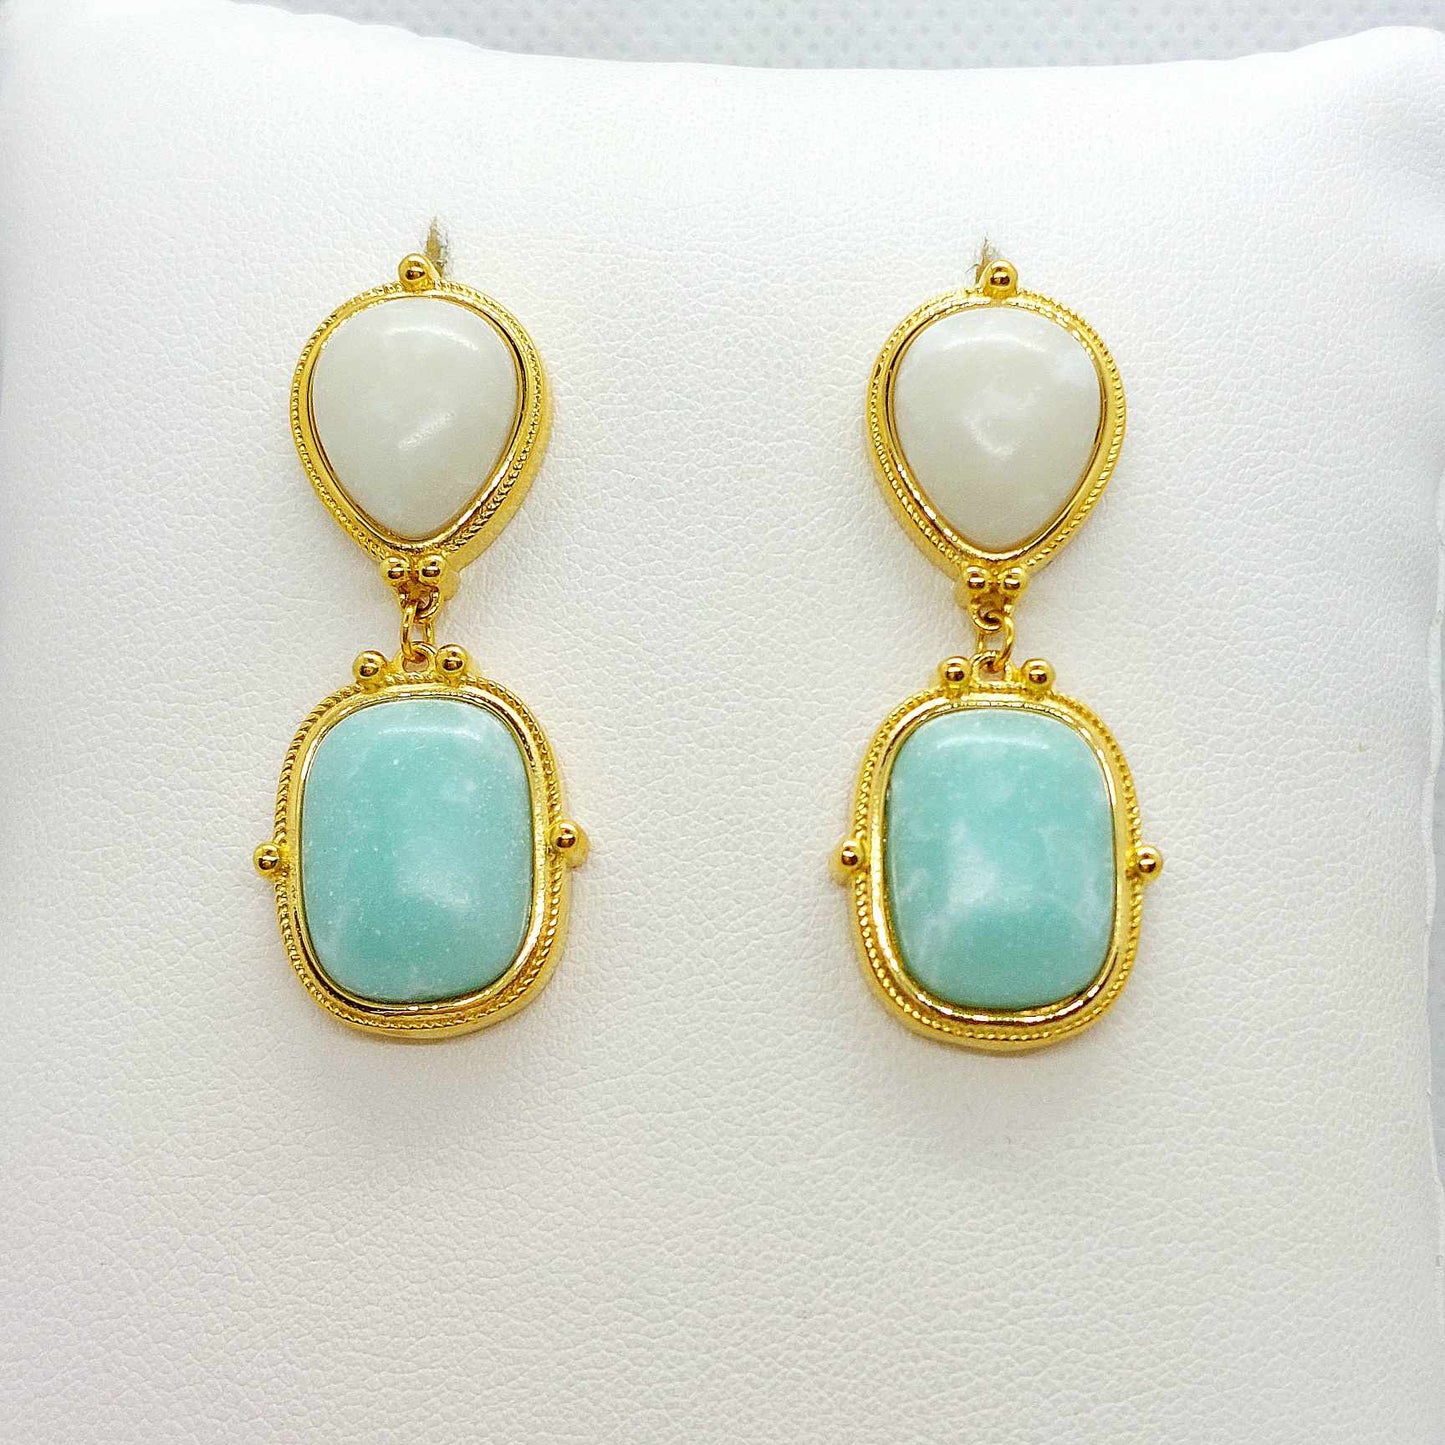 Natural White Jade and Amazonite Dangle Stud Earrings in Stainless Steel Gold Plated